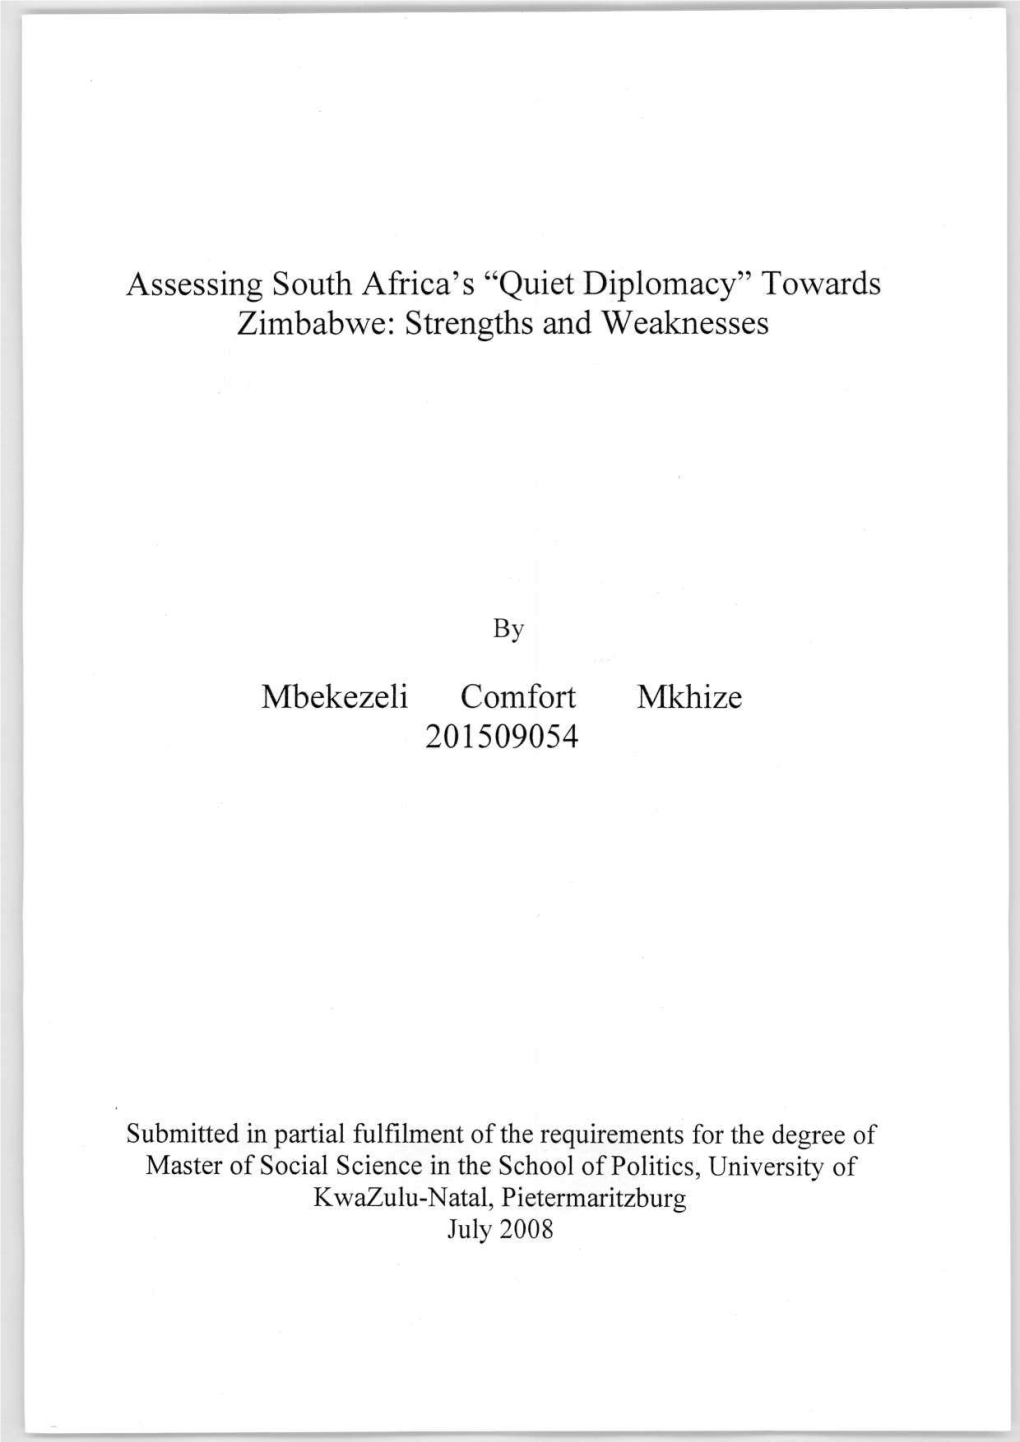 Assessing South Africa's "Quiet Diplomacy" Towards Zimbabwe: Strengths and Weaknesses